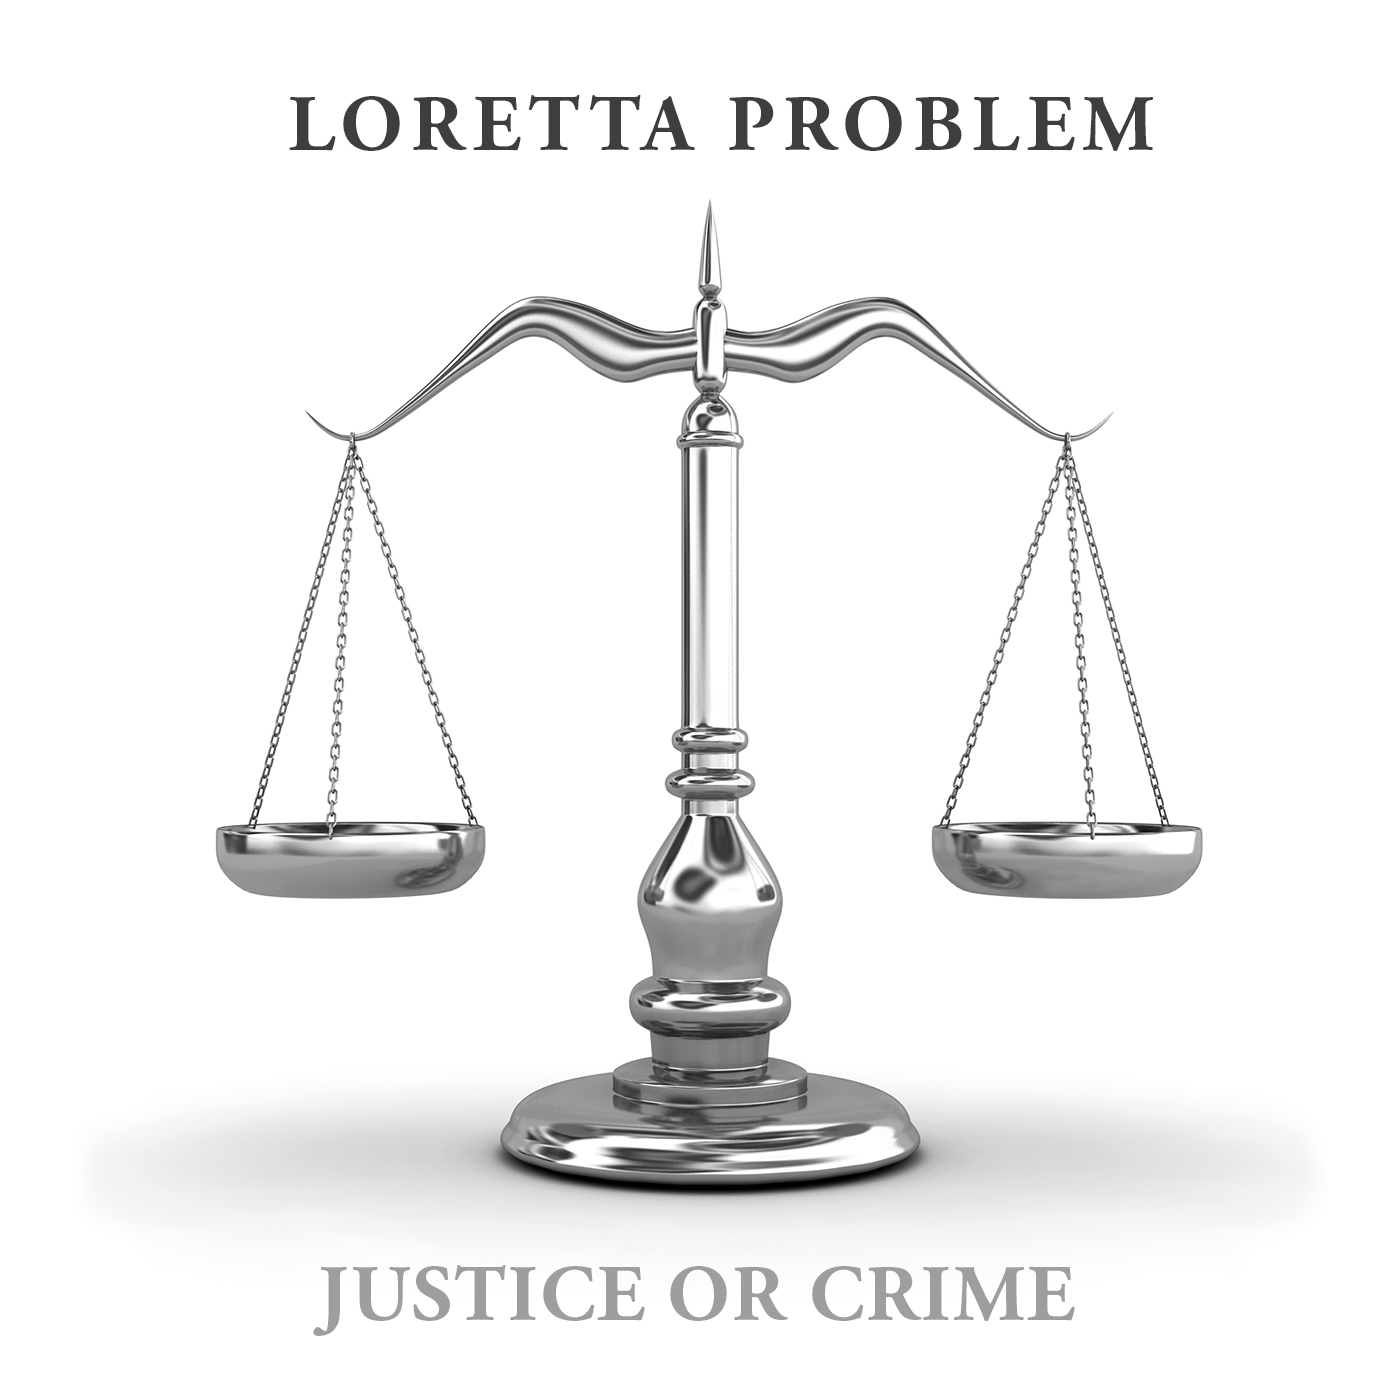 Justice or crime